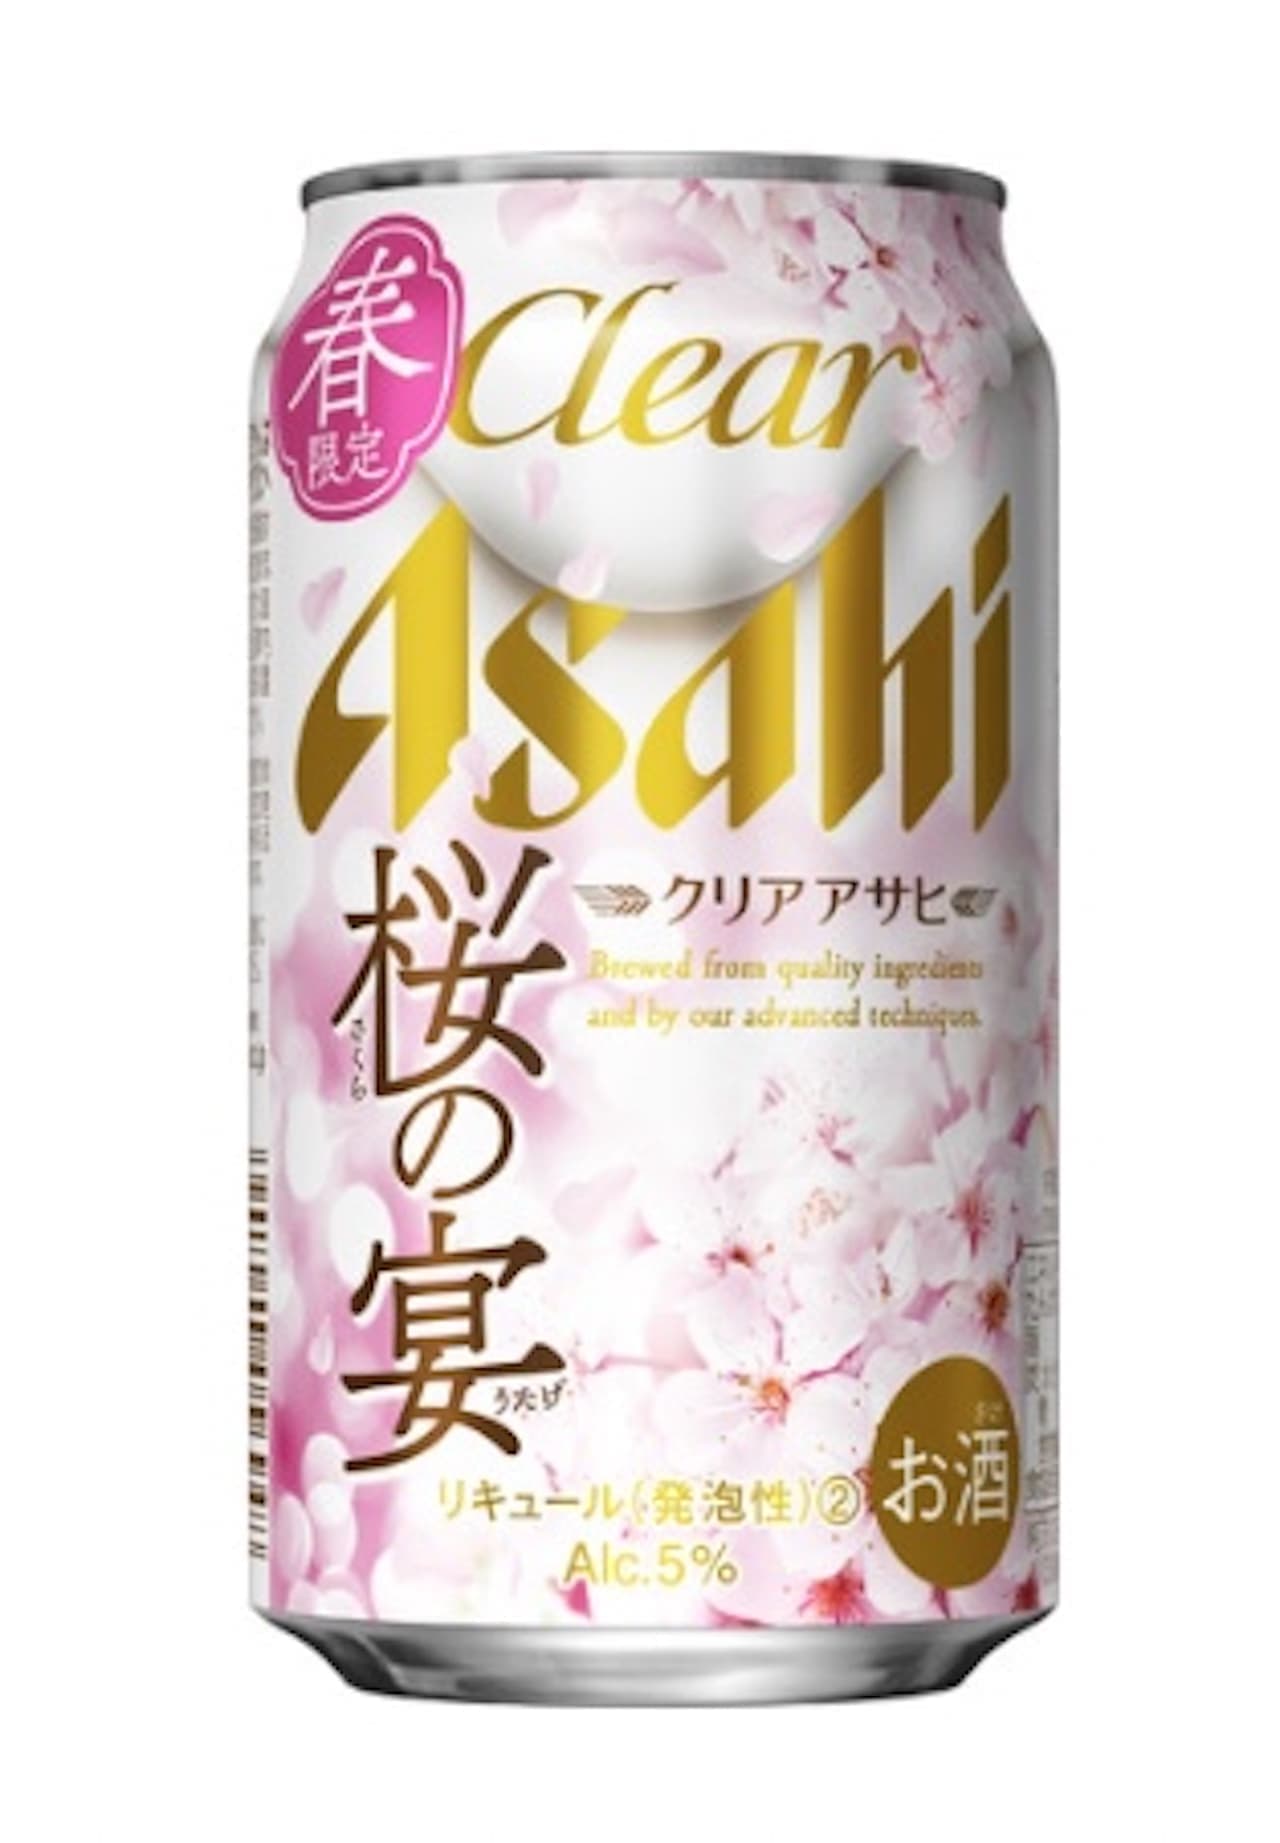 Spring limited new genre "Clear Asahi Cherry Blossom Feast"